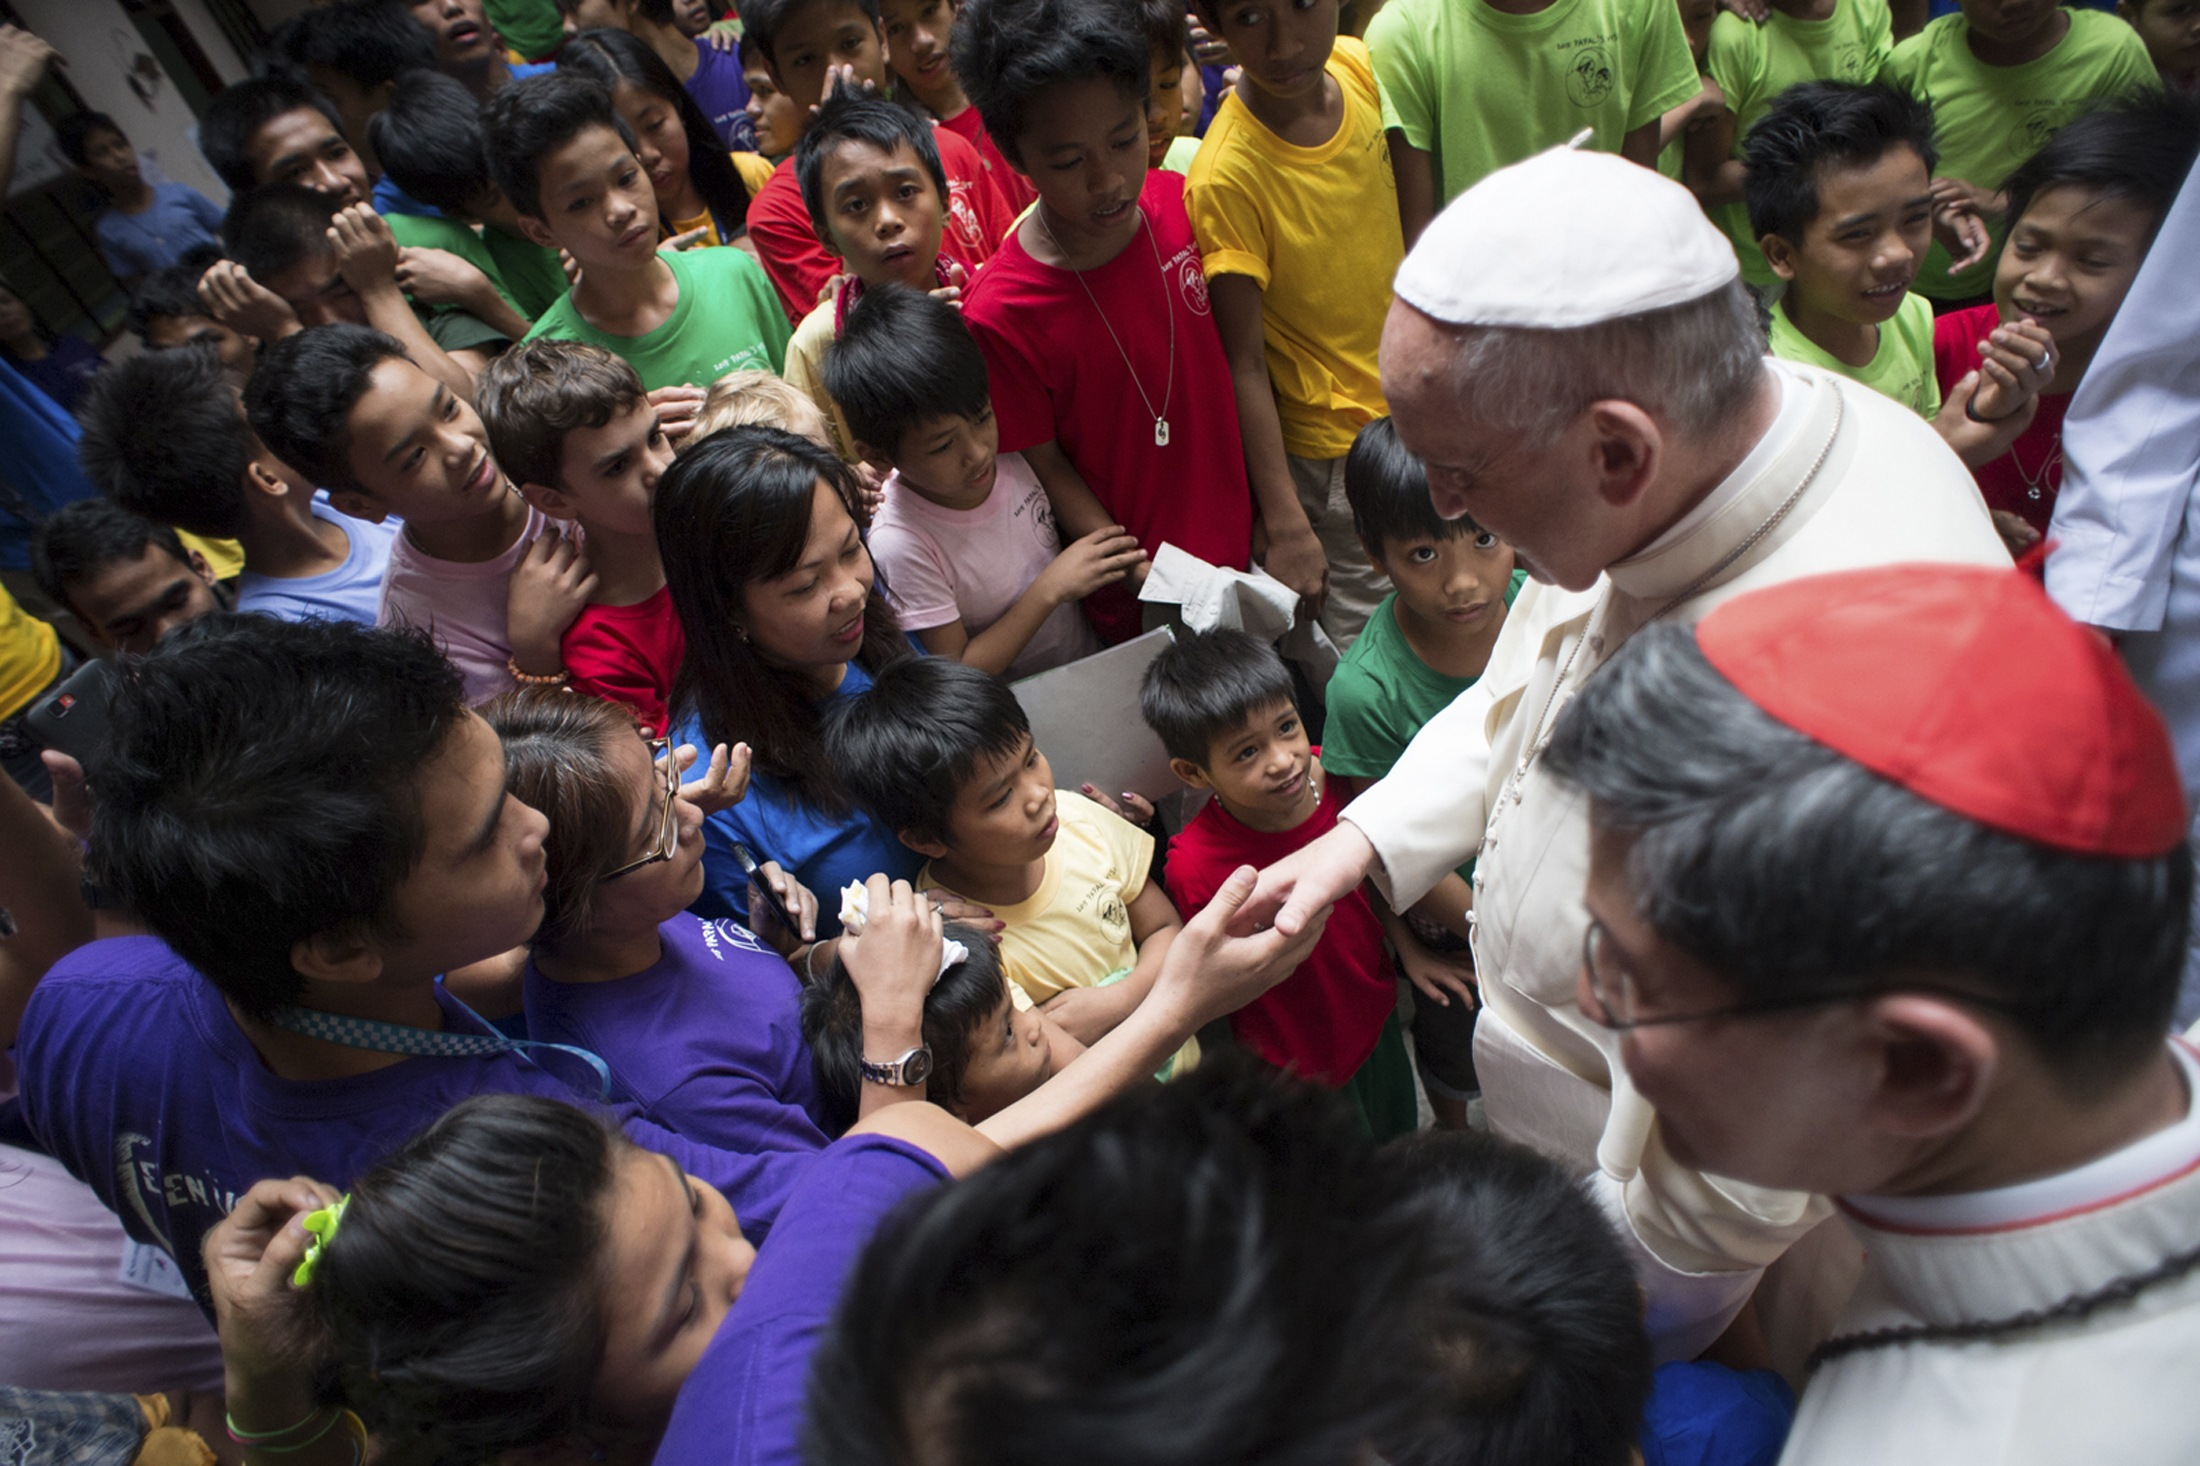 Pope Francis is greeted by young people at a home for former street children in Manila, Philippines, Jan. 16. PHOTO: CNS/L'Osservatore Romano via Reuters